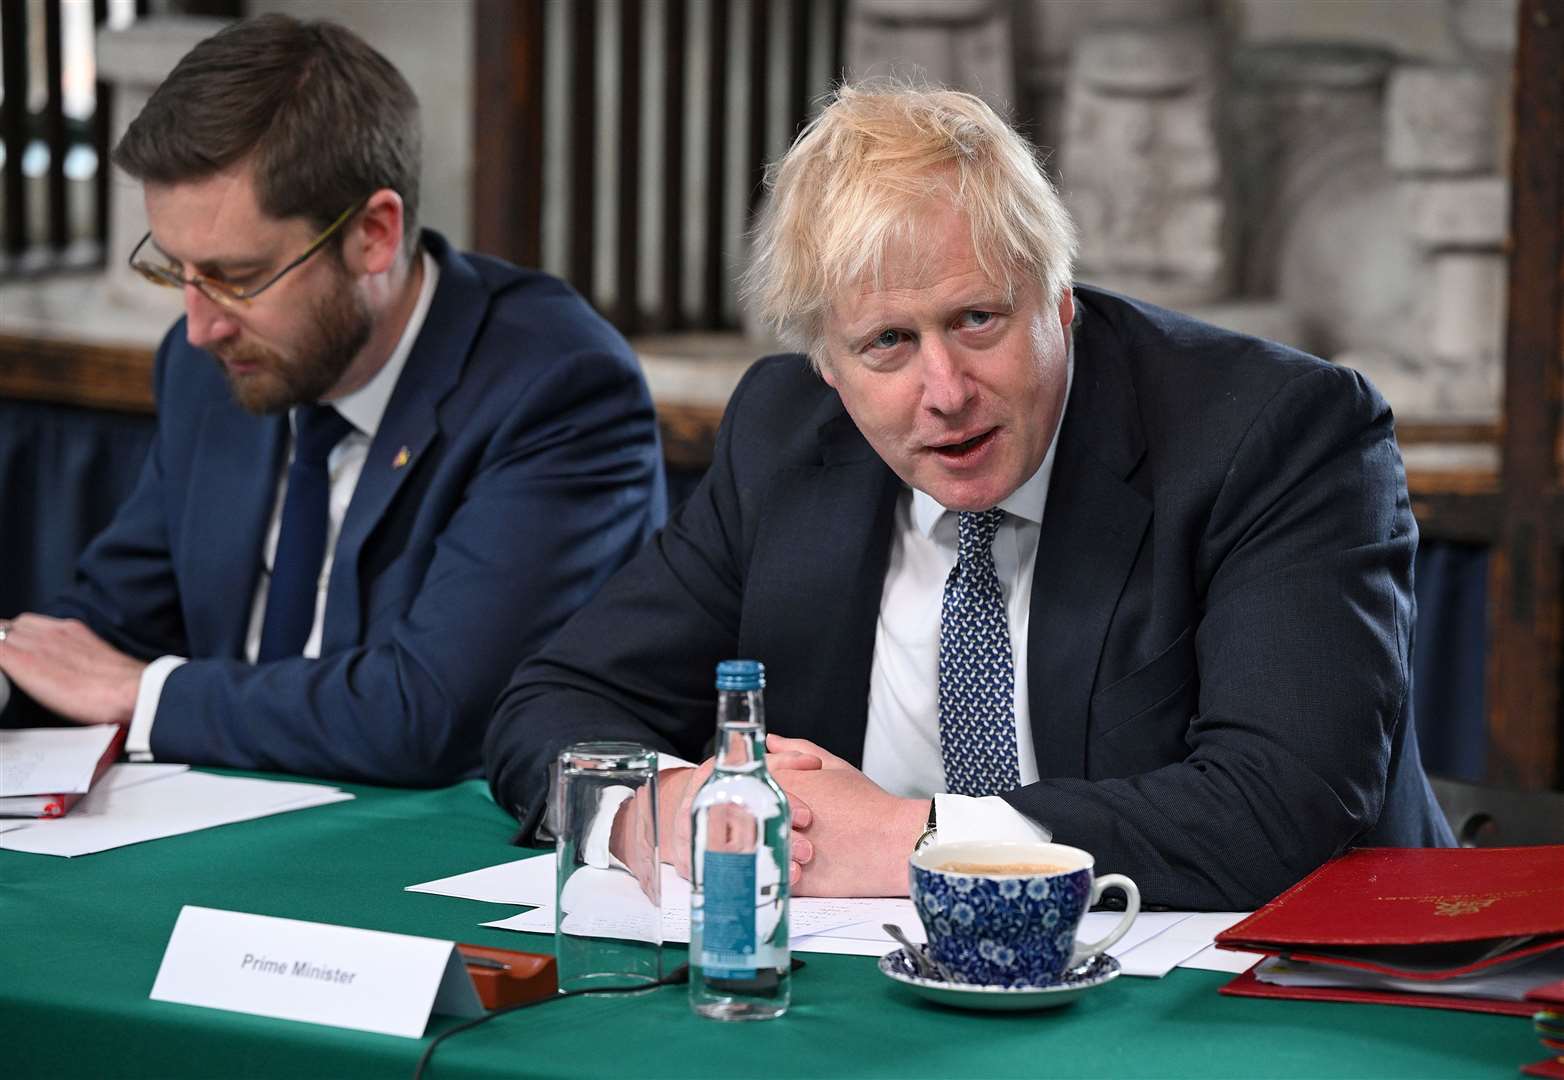 The Liberal Democrats asked Simon Case to investigate what Boris Johnson knew about the allegations when he gave Peter Bone a frontbench job (Oli Scarff/PA)